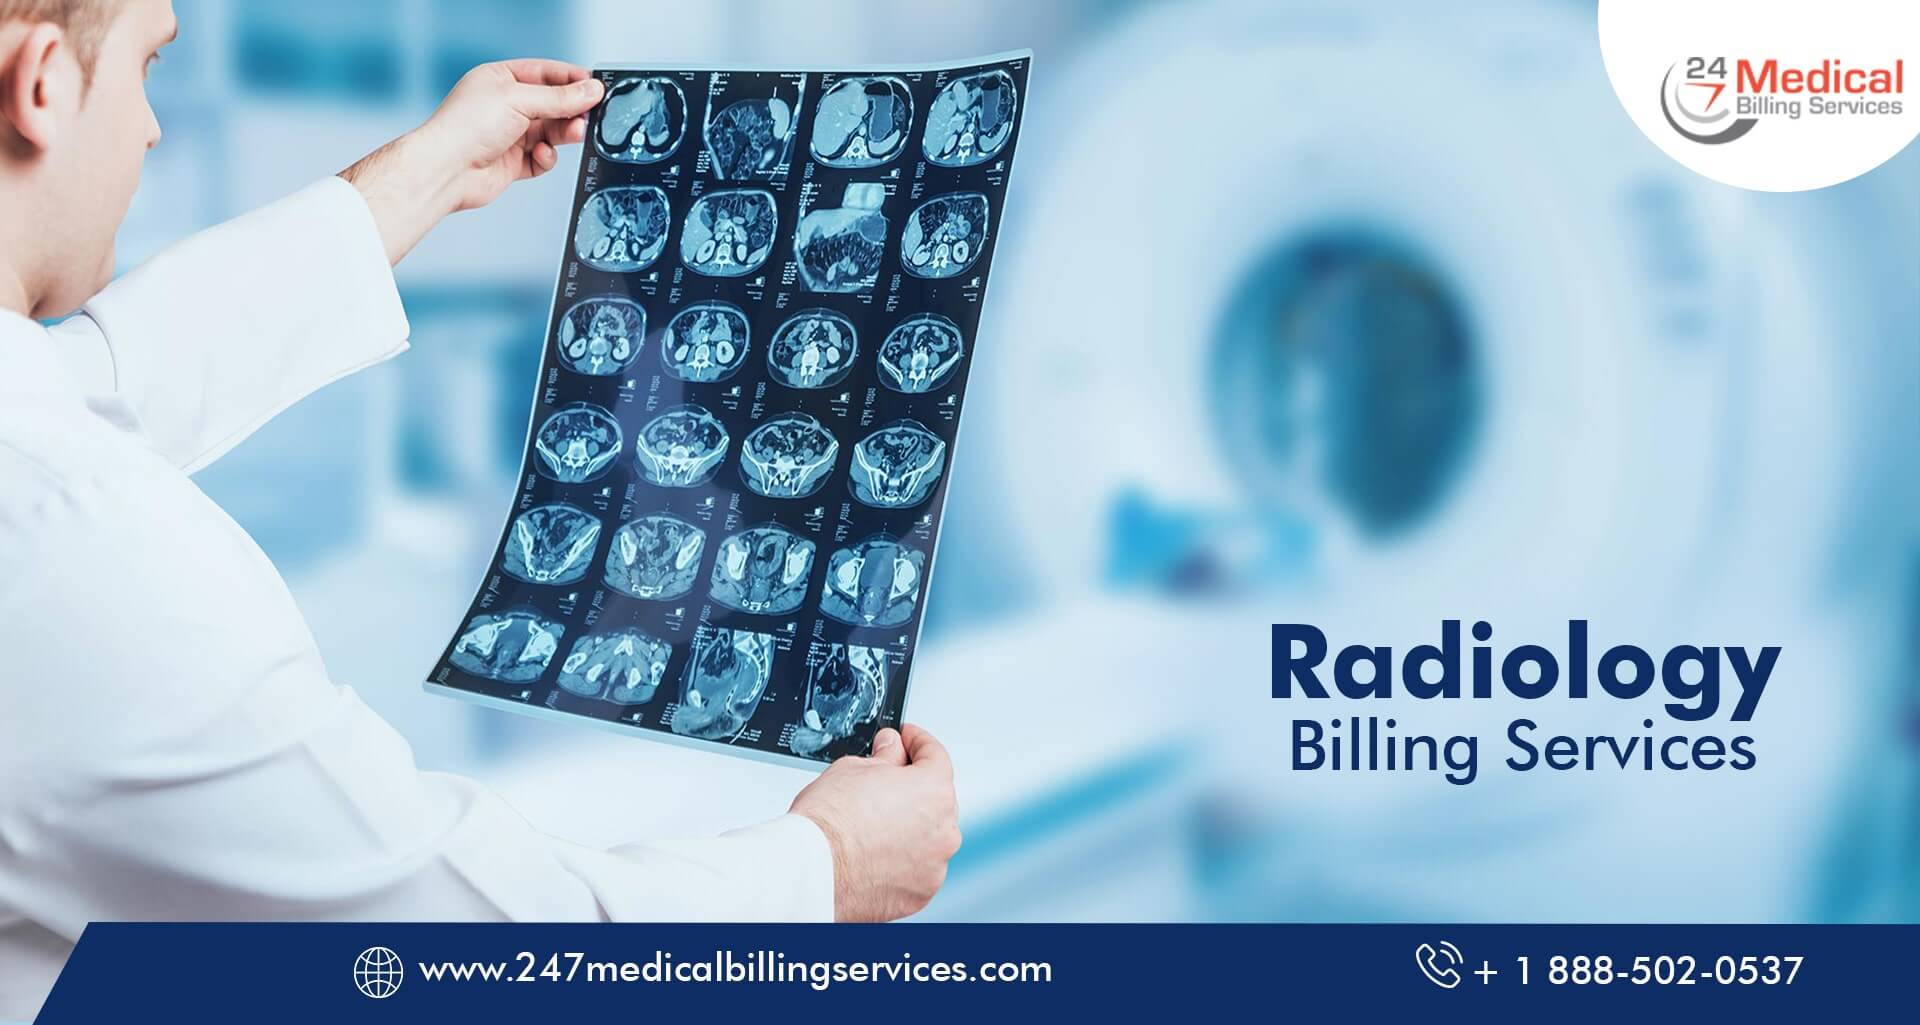  Radiology Billing Services in New Jersey (NJ)